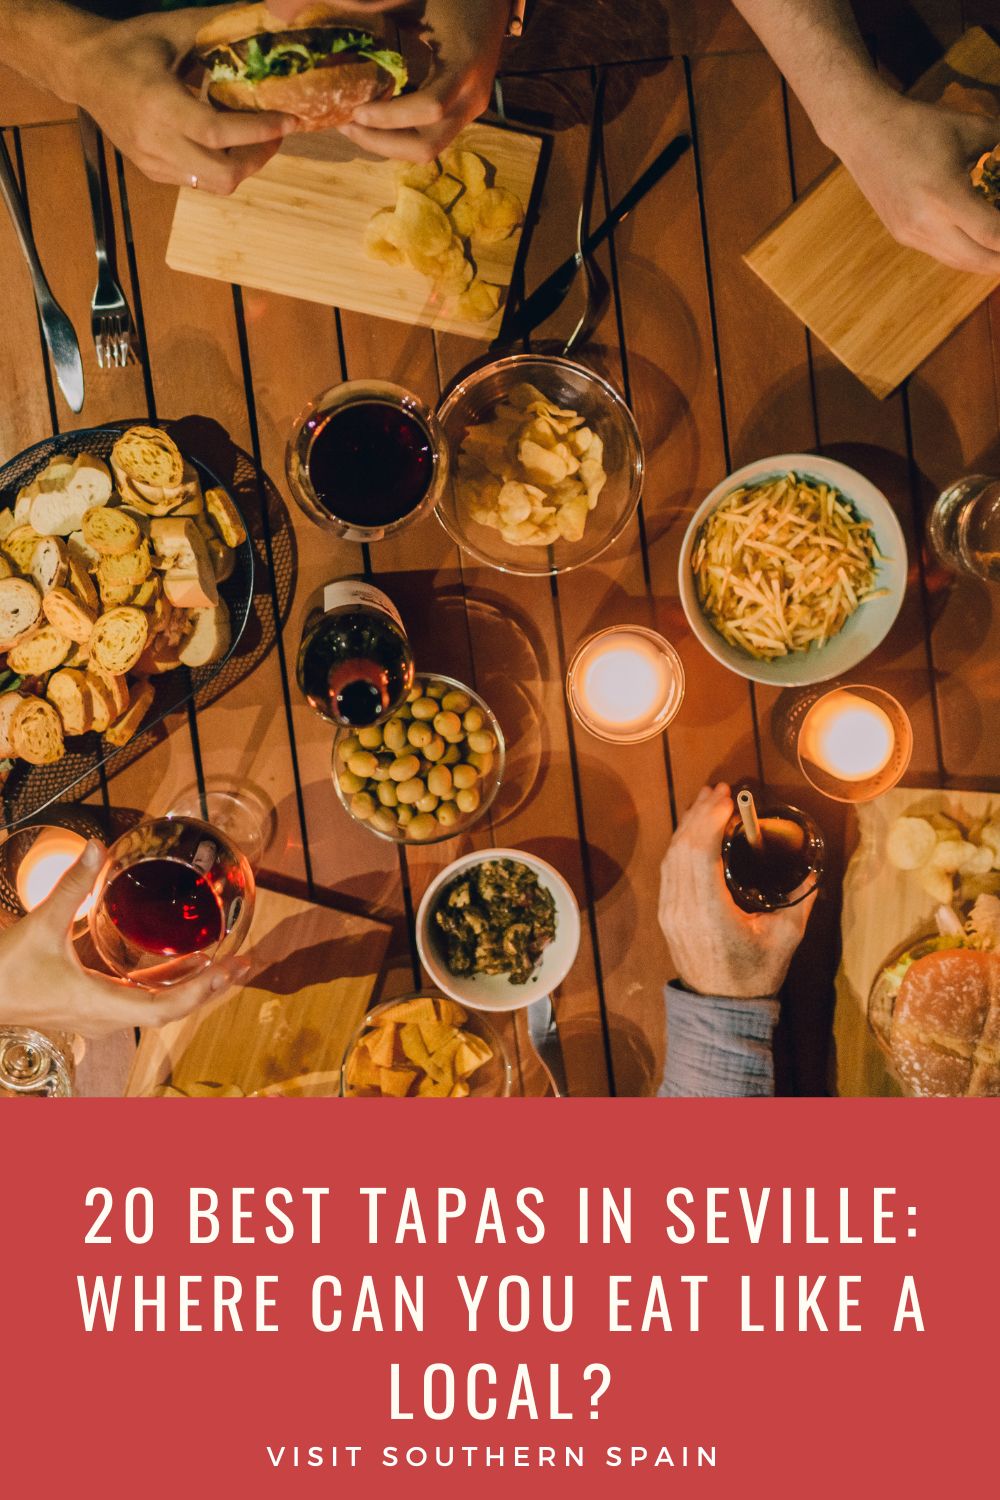 Are you looking for the Best Tapas in Seville where you can eat just like a local? When you are visiting Southern Spain, you must make time to try the best tapas in Seville. Our guide contains some of the best restaurants in Seville where the traditional tapas are served in the most authentic Spanish setting. You could eat the most popular tapas in Seville and taste the Spanish cuisine, which will make you always come back for more. #tapasinseville #besttapasinseville #tapas #seville #tapasbar